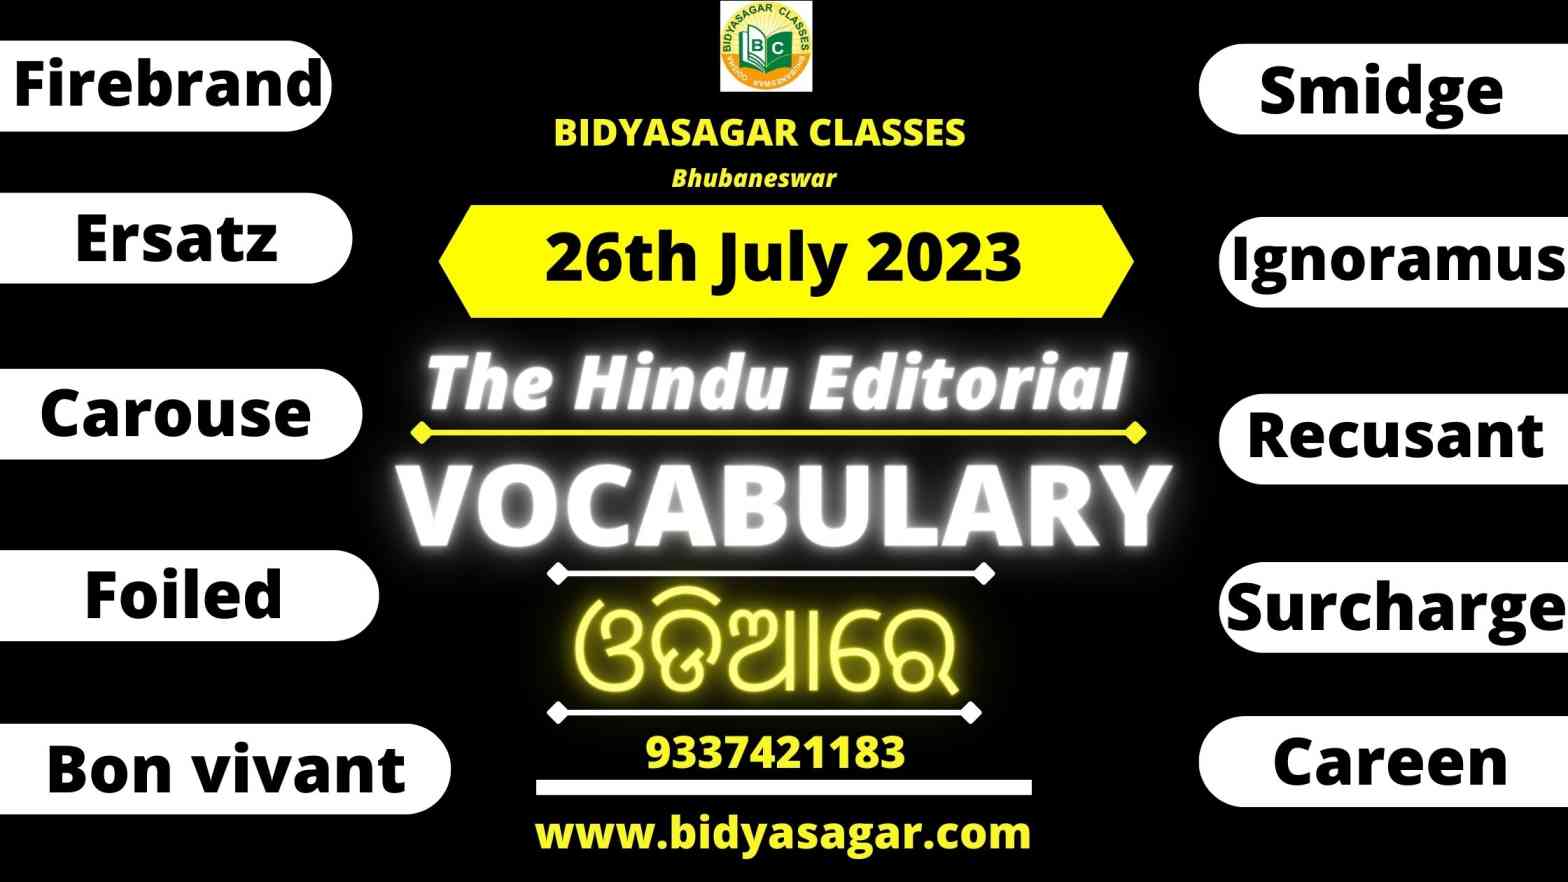 The Hindu Editorial Vocabulary of 26th July 2023